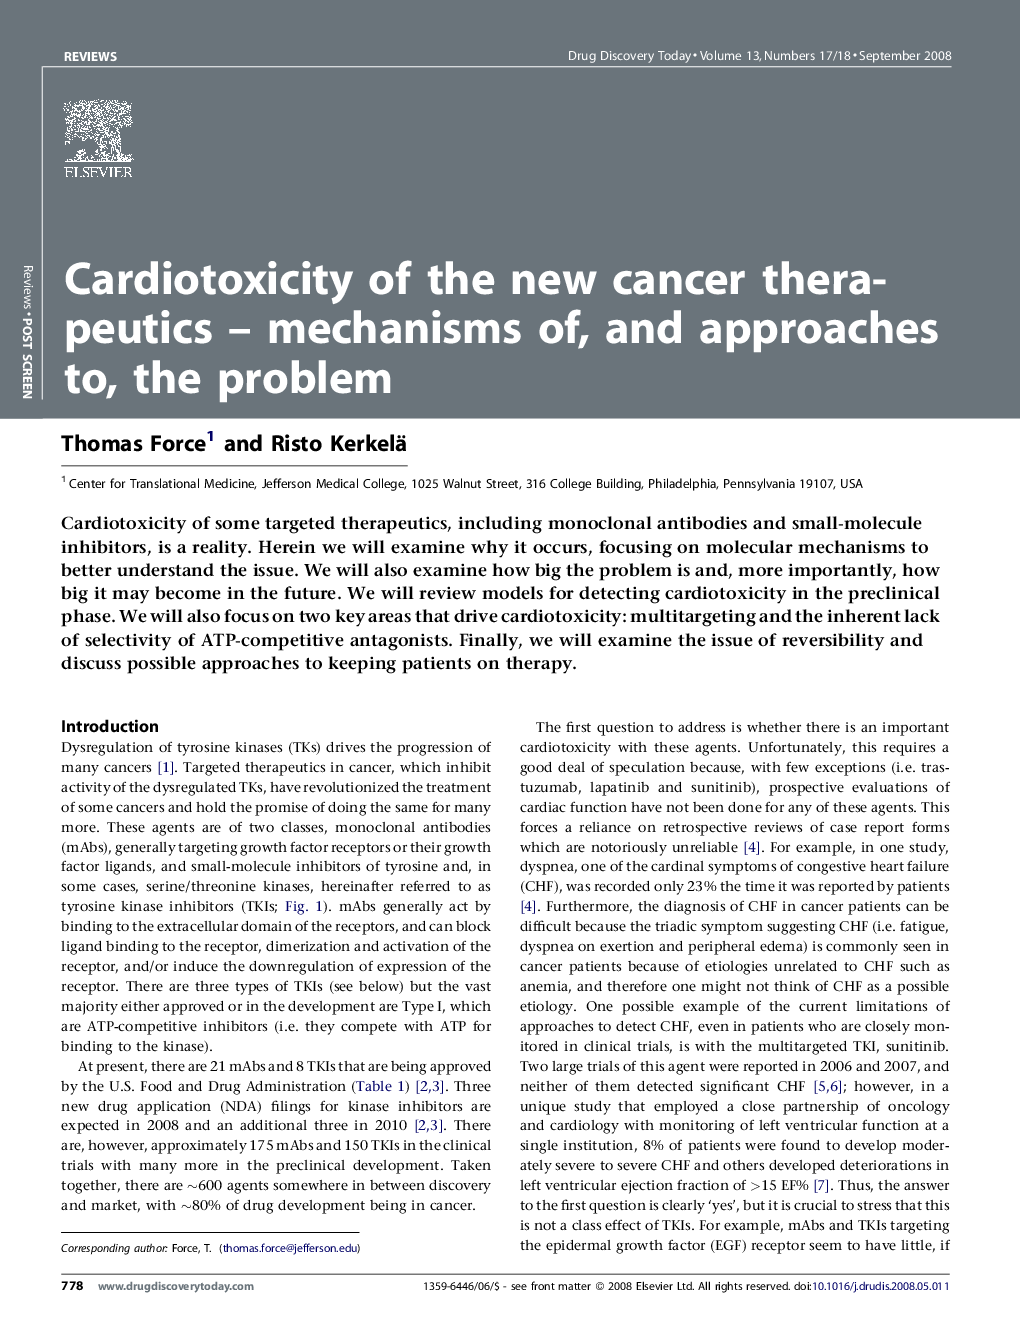 Cardiotoxicity of the new cancer therapeutics – mechanisms of, and approaches to, the problem